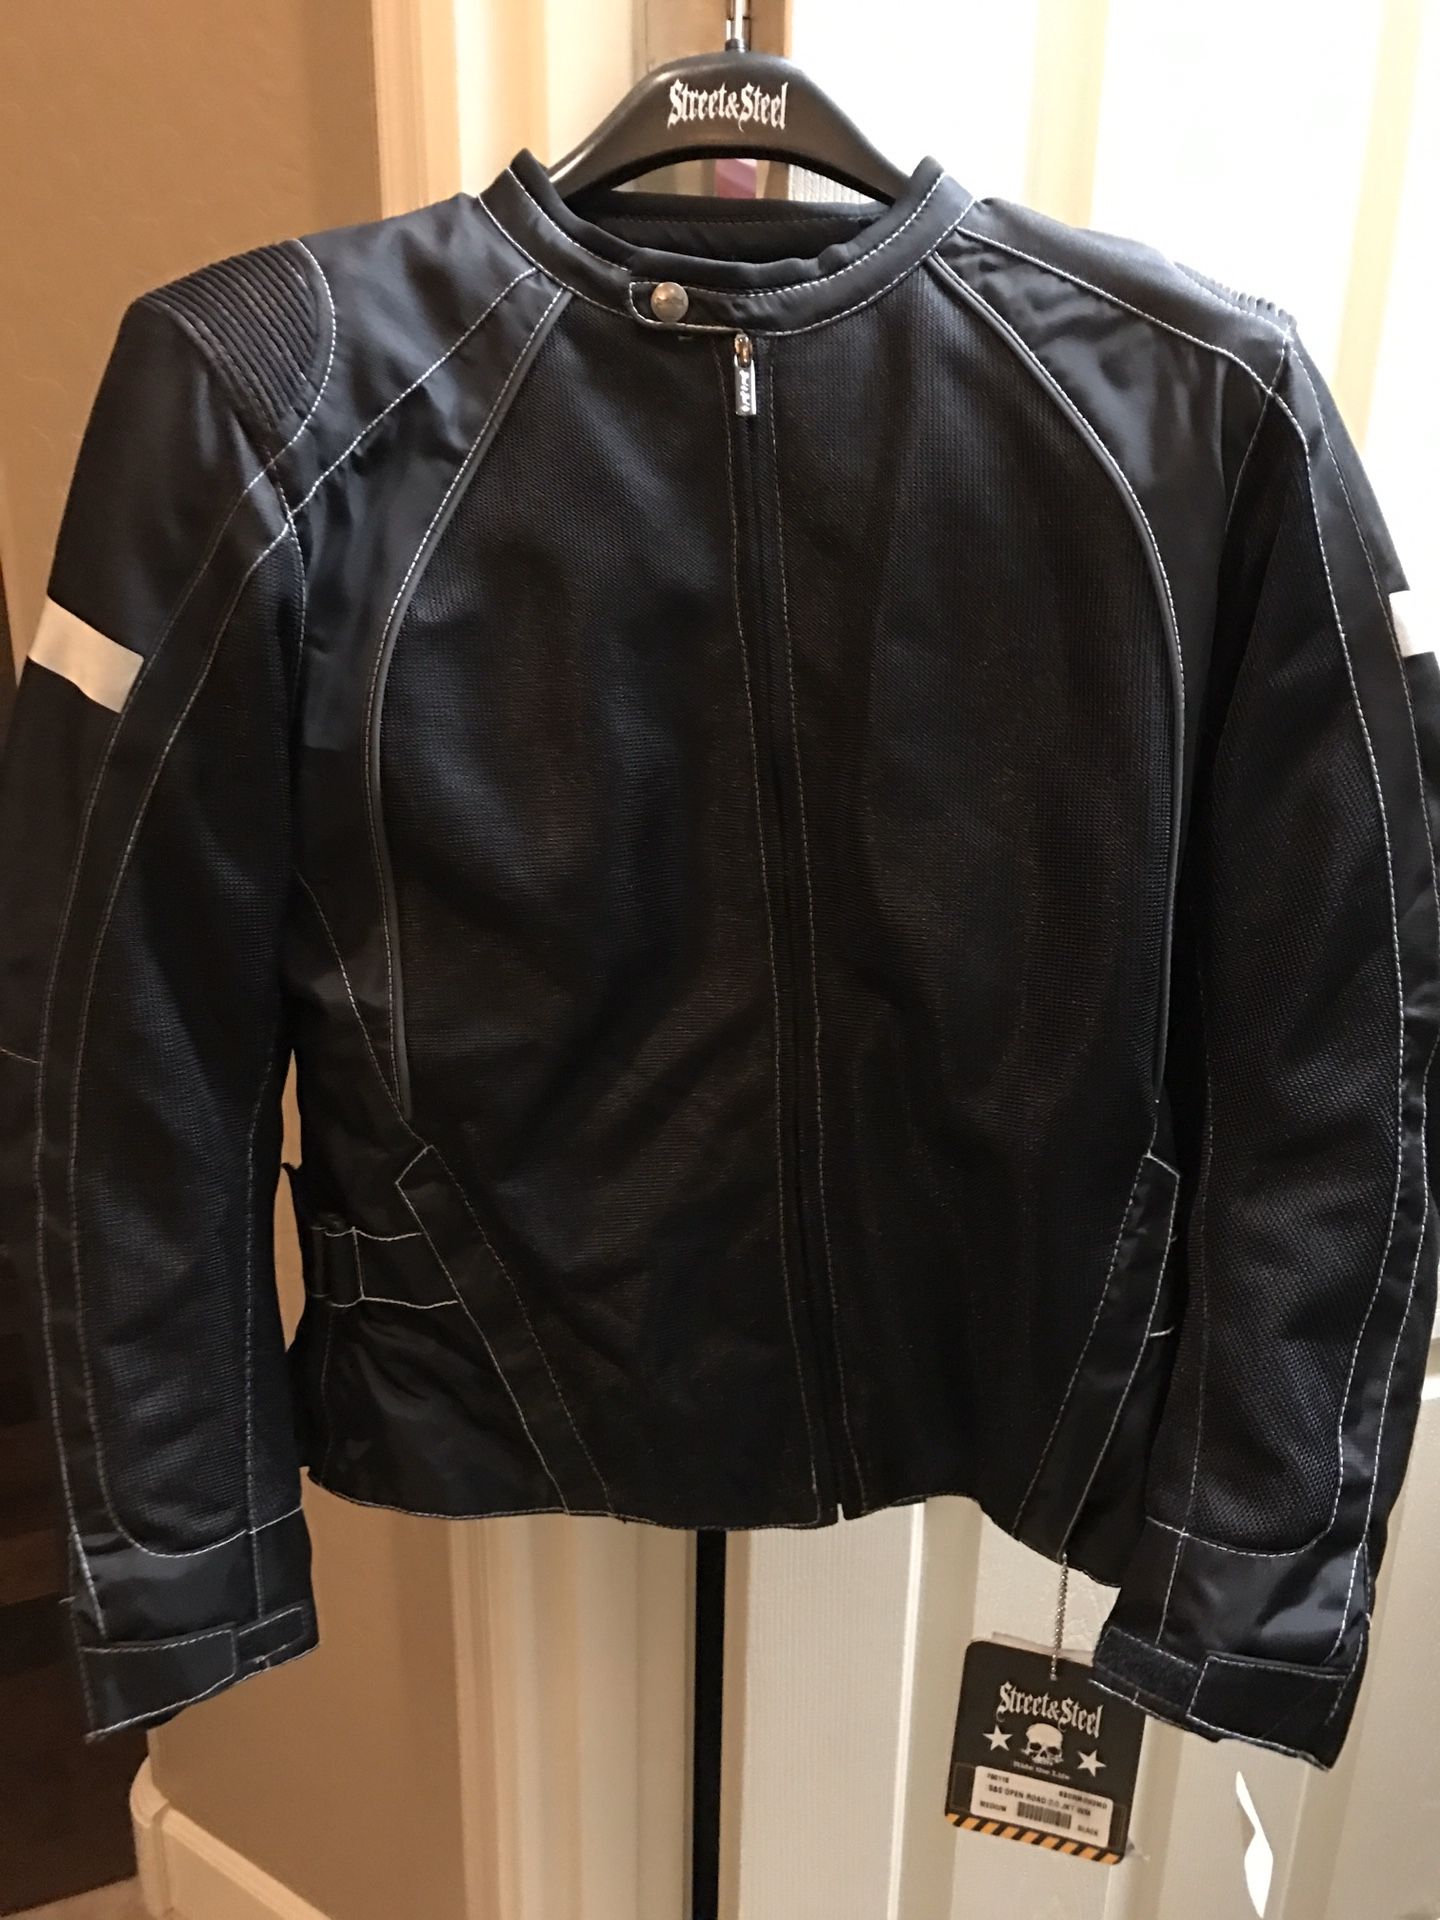 Brand New Motorcycle Riding Jacket